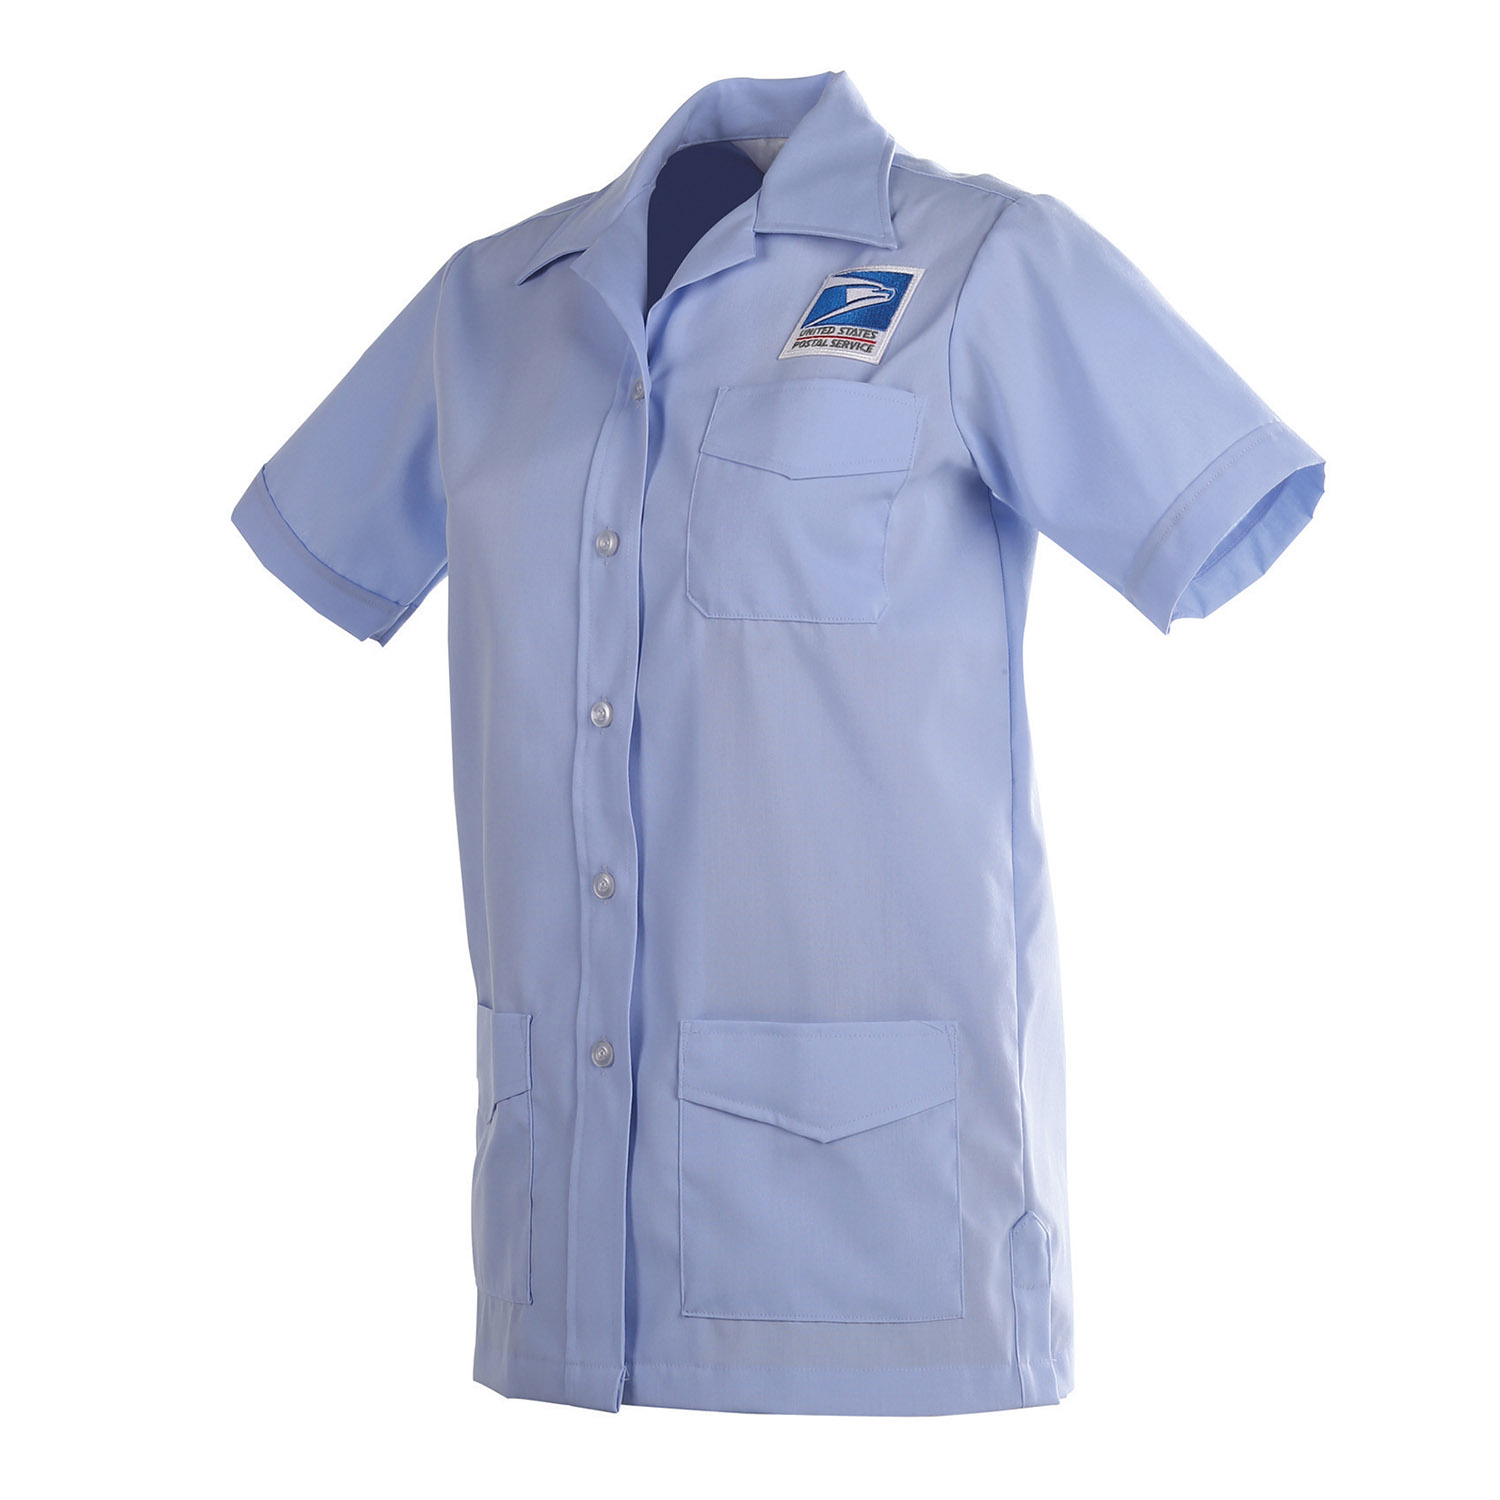 Postal Uniform Shirt Jac Womens for Letter Carriers and Moto